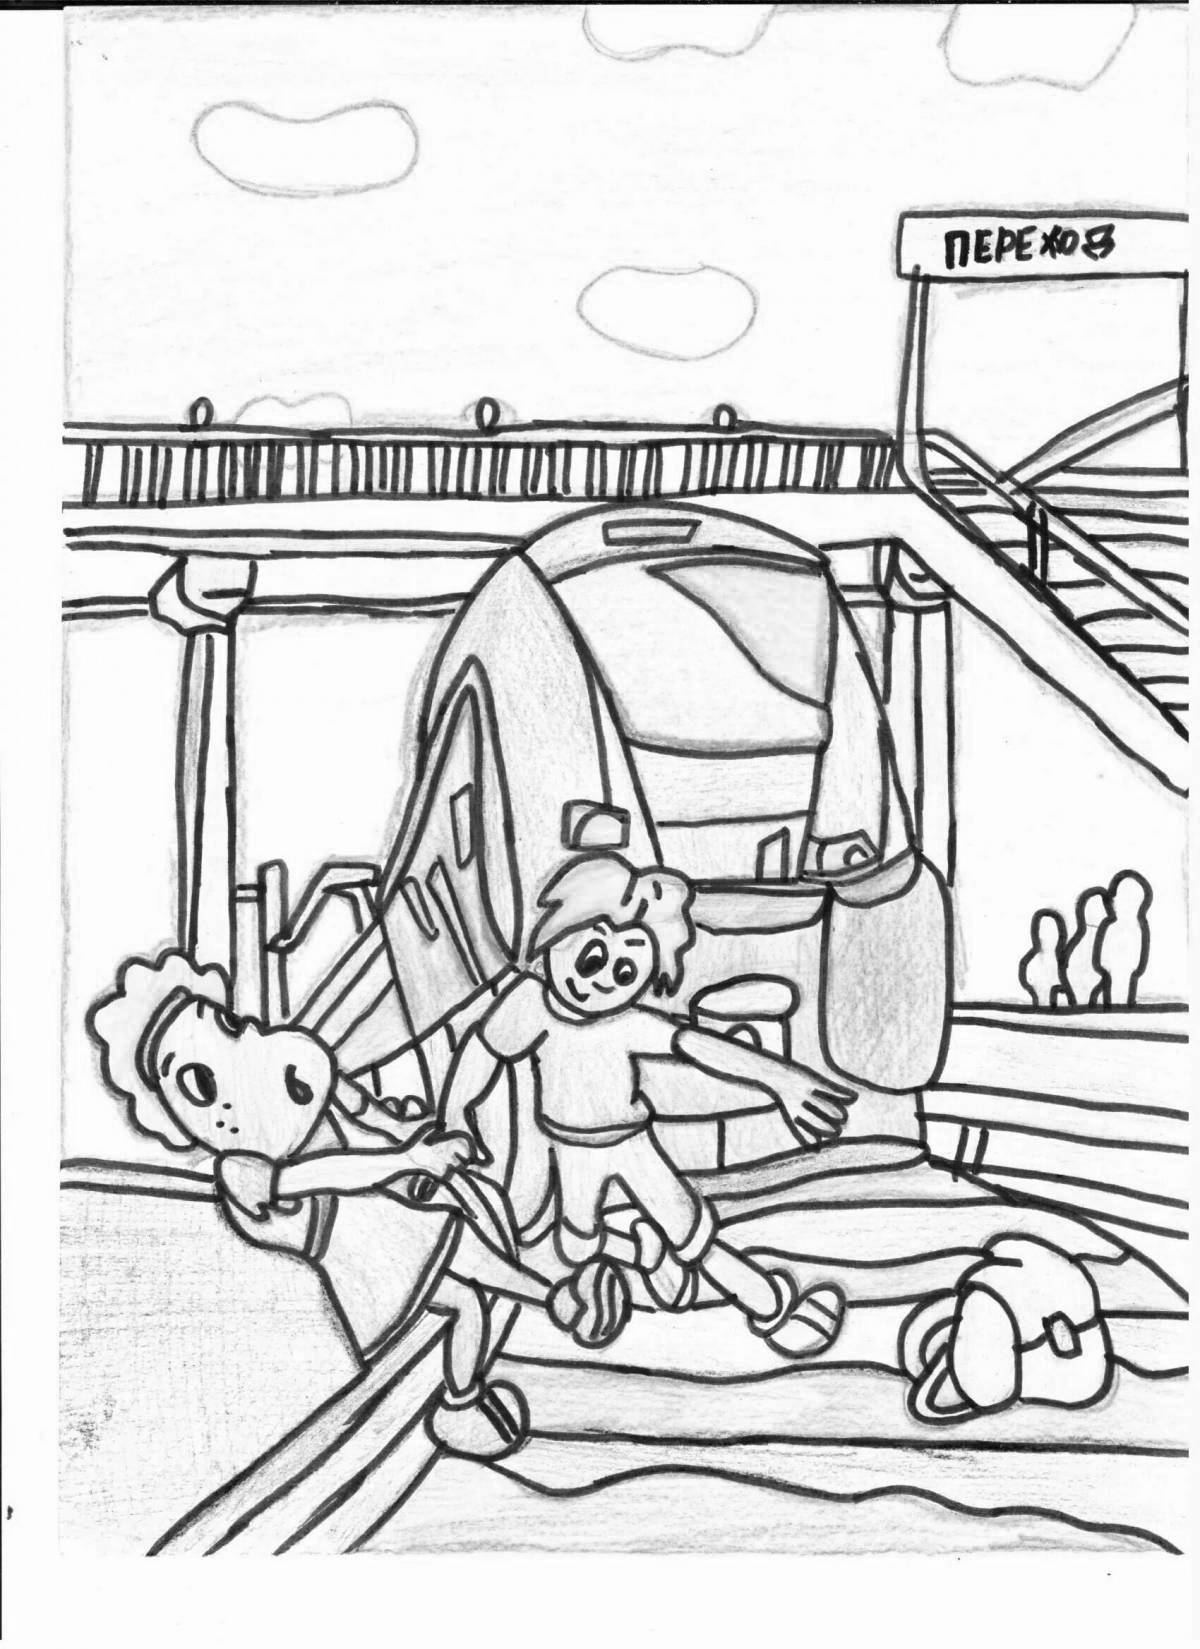 Intriguing railroad safety coloring page